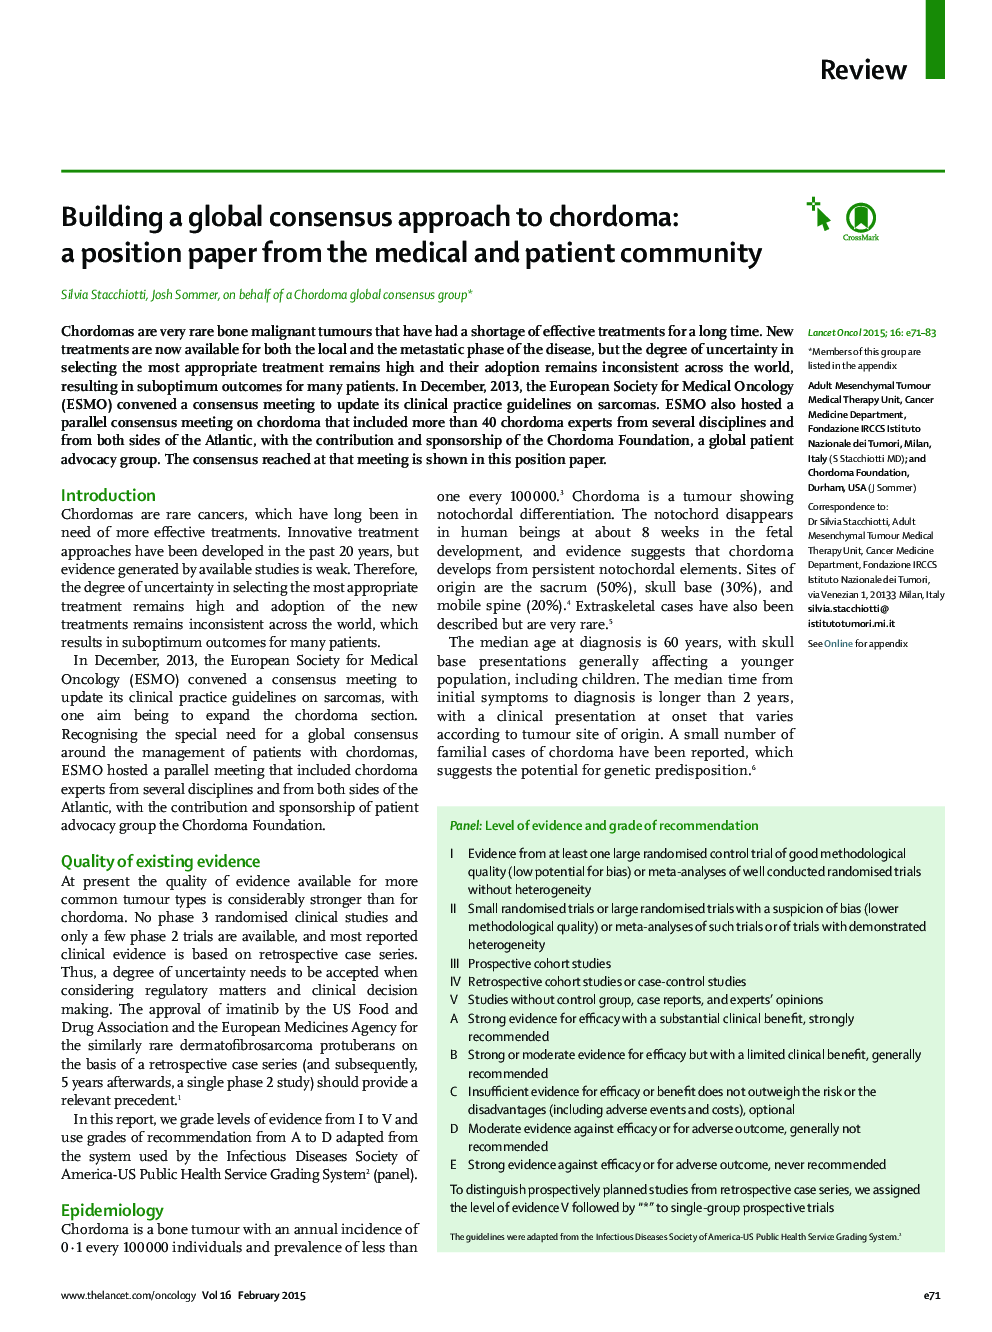 Building a global consensus approach to chordoma: a position paper from the medical and patient community